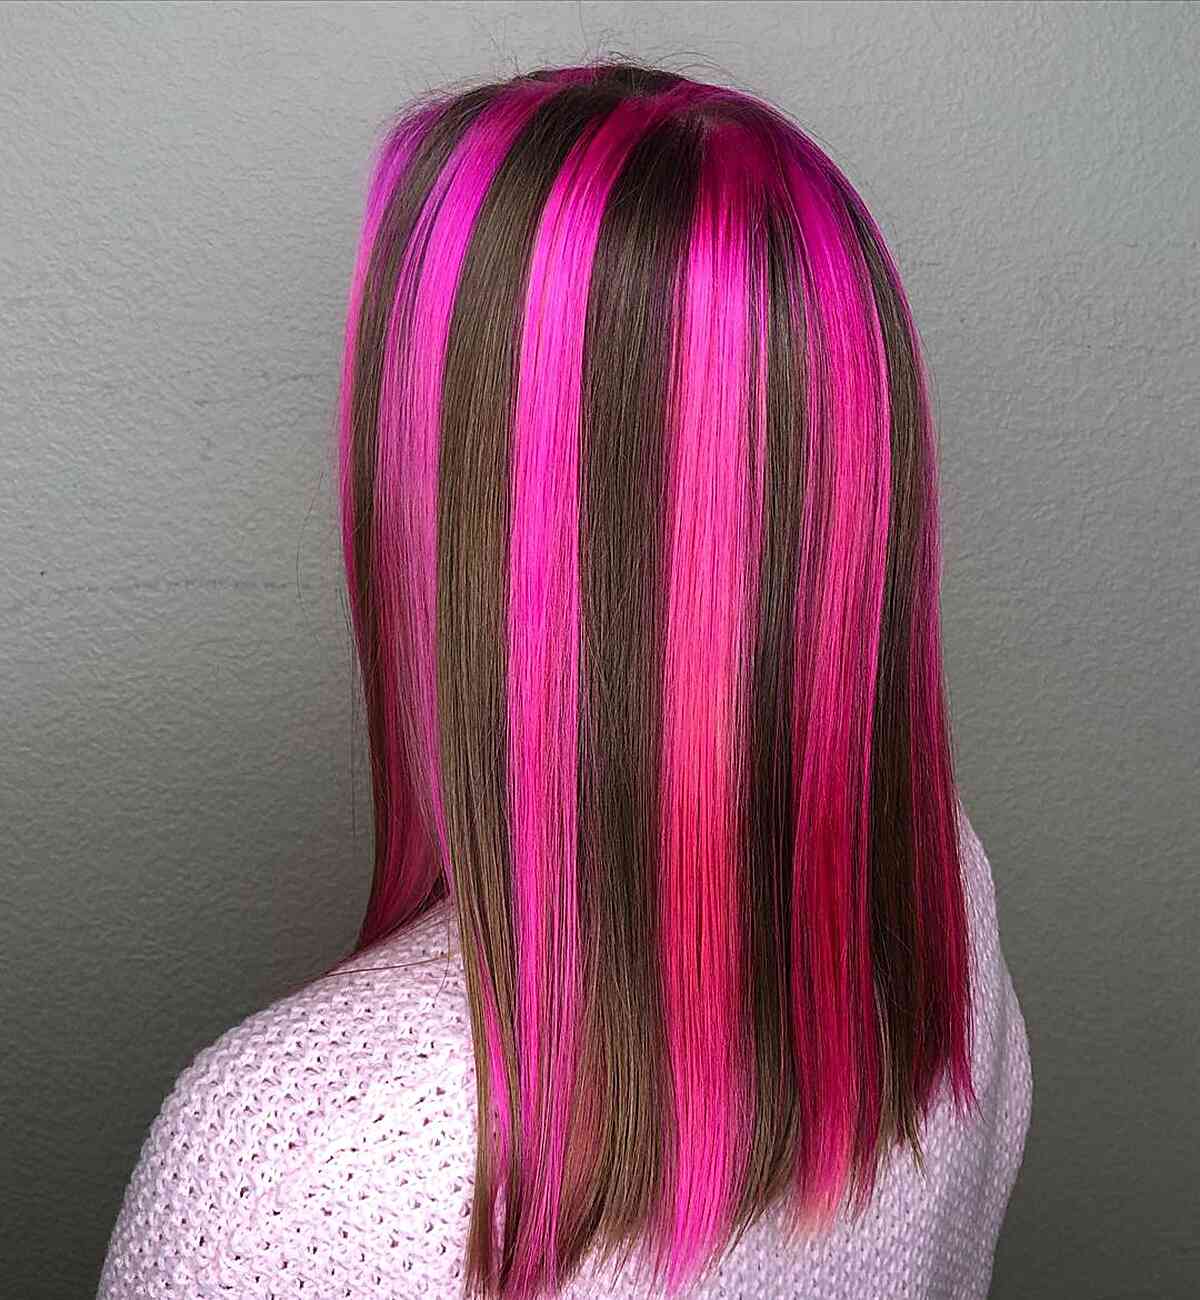 Black and Pink Chunky Highlights for Mid-Length Straight Skunk Striped Hair